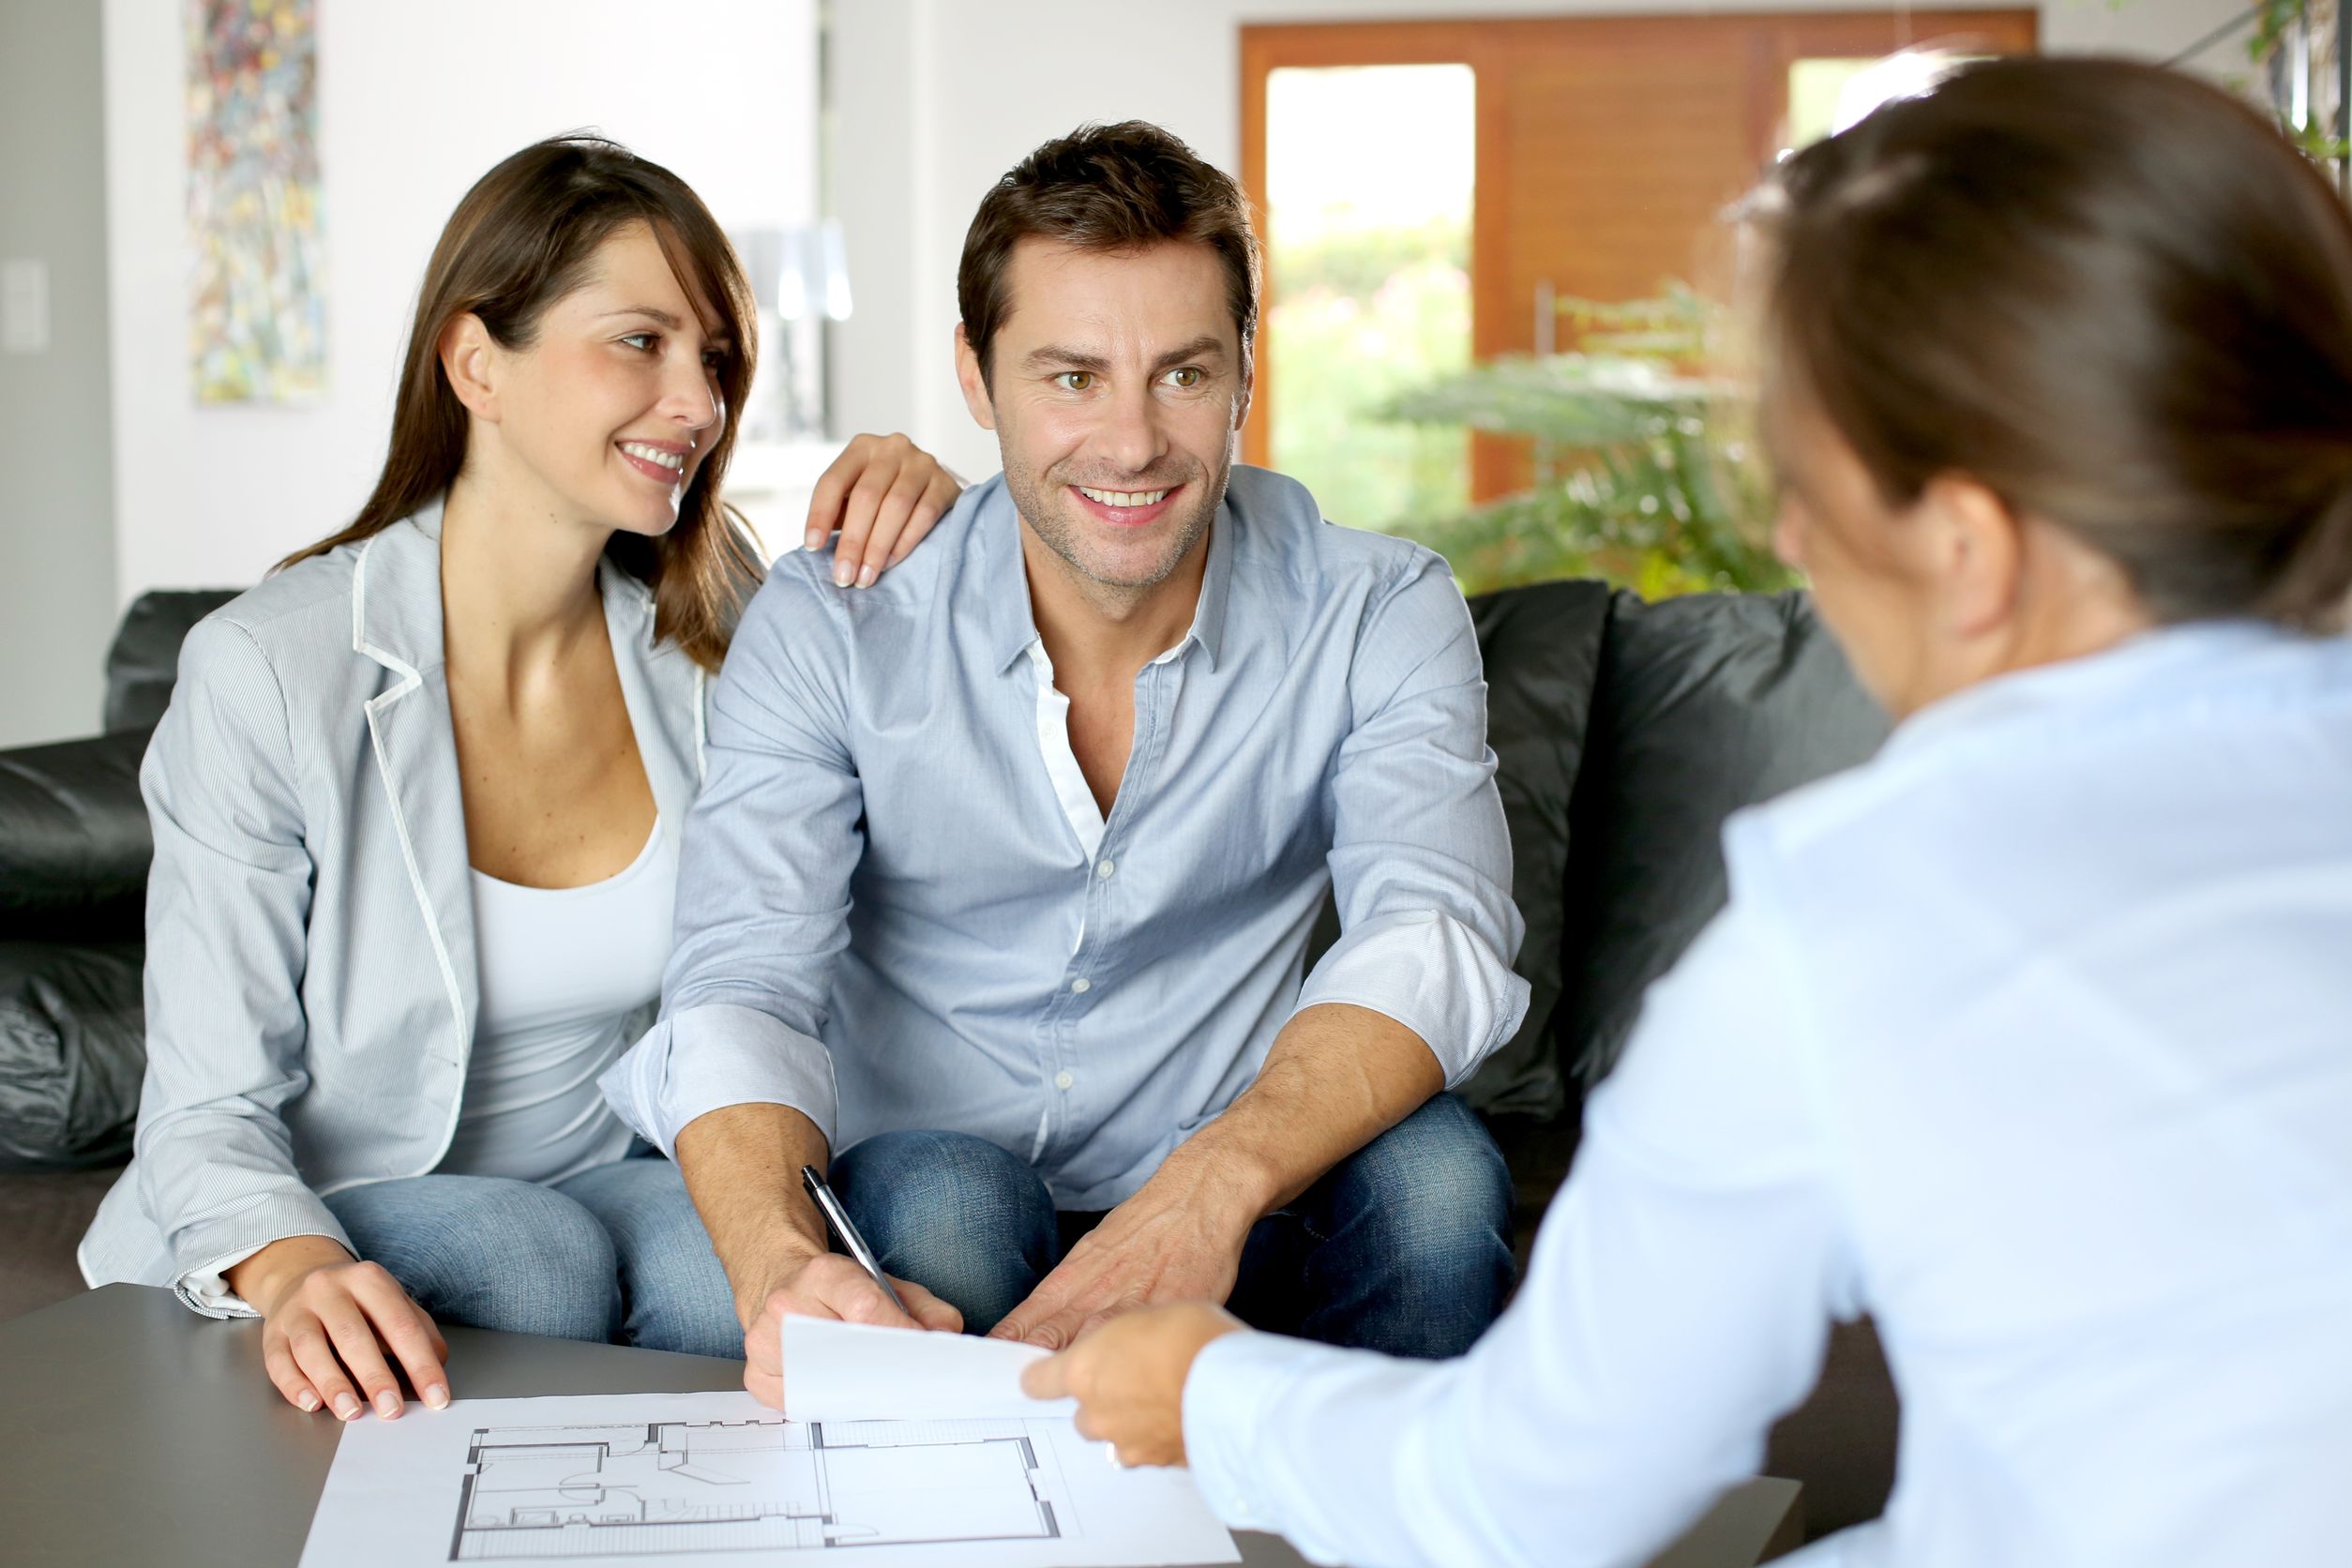 When to Hire a Financial Planning Advisor in Orange County